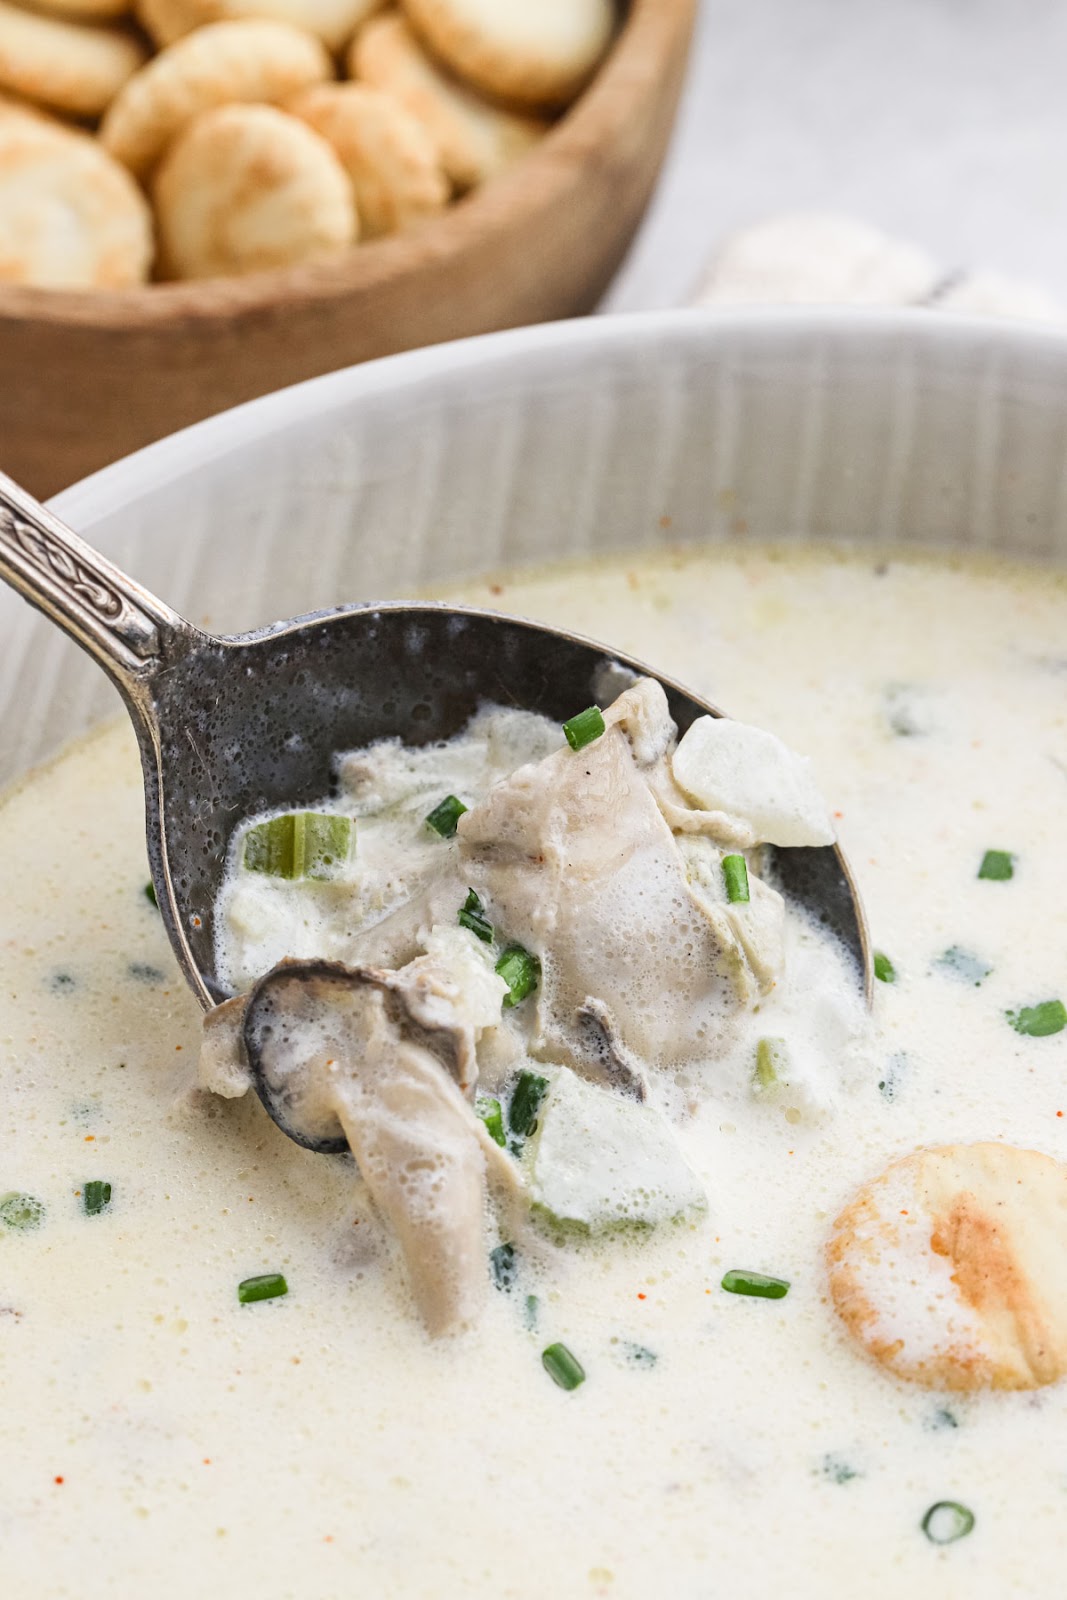 A close up of oyster stew being served